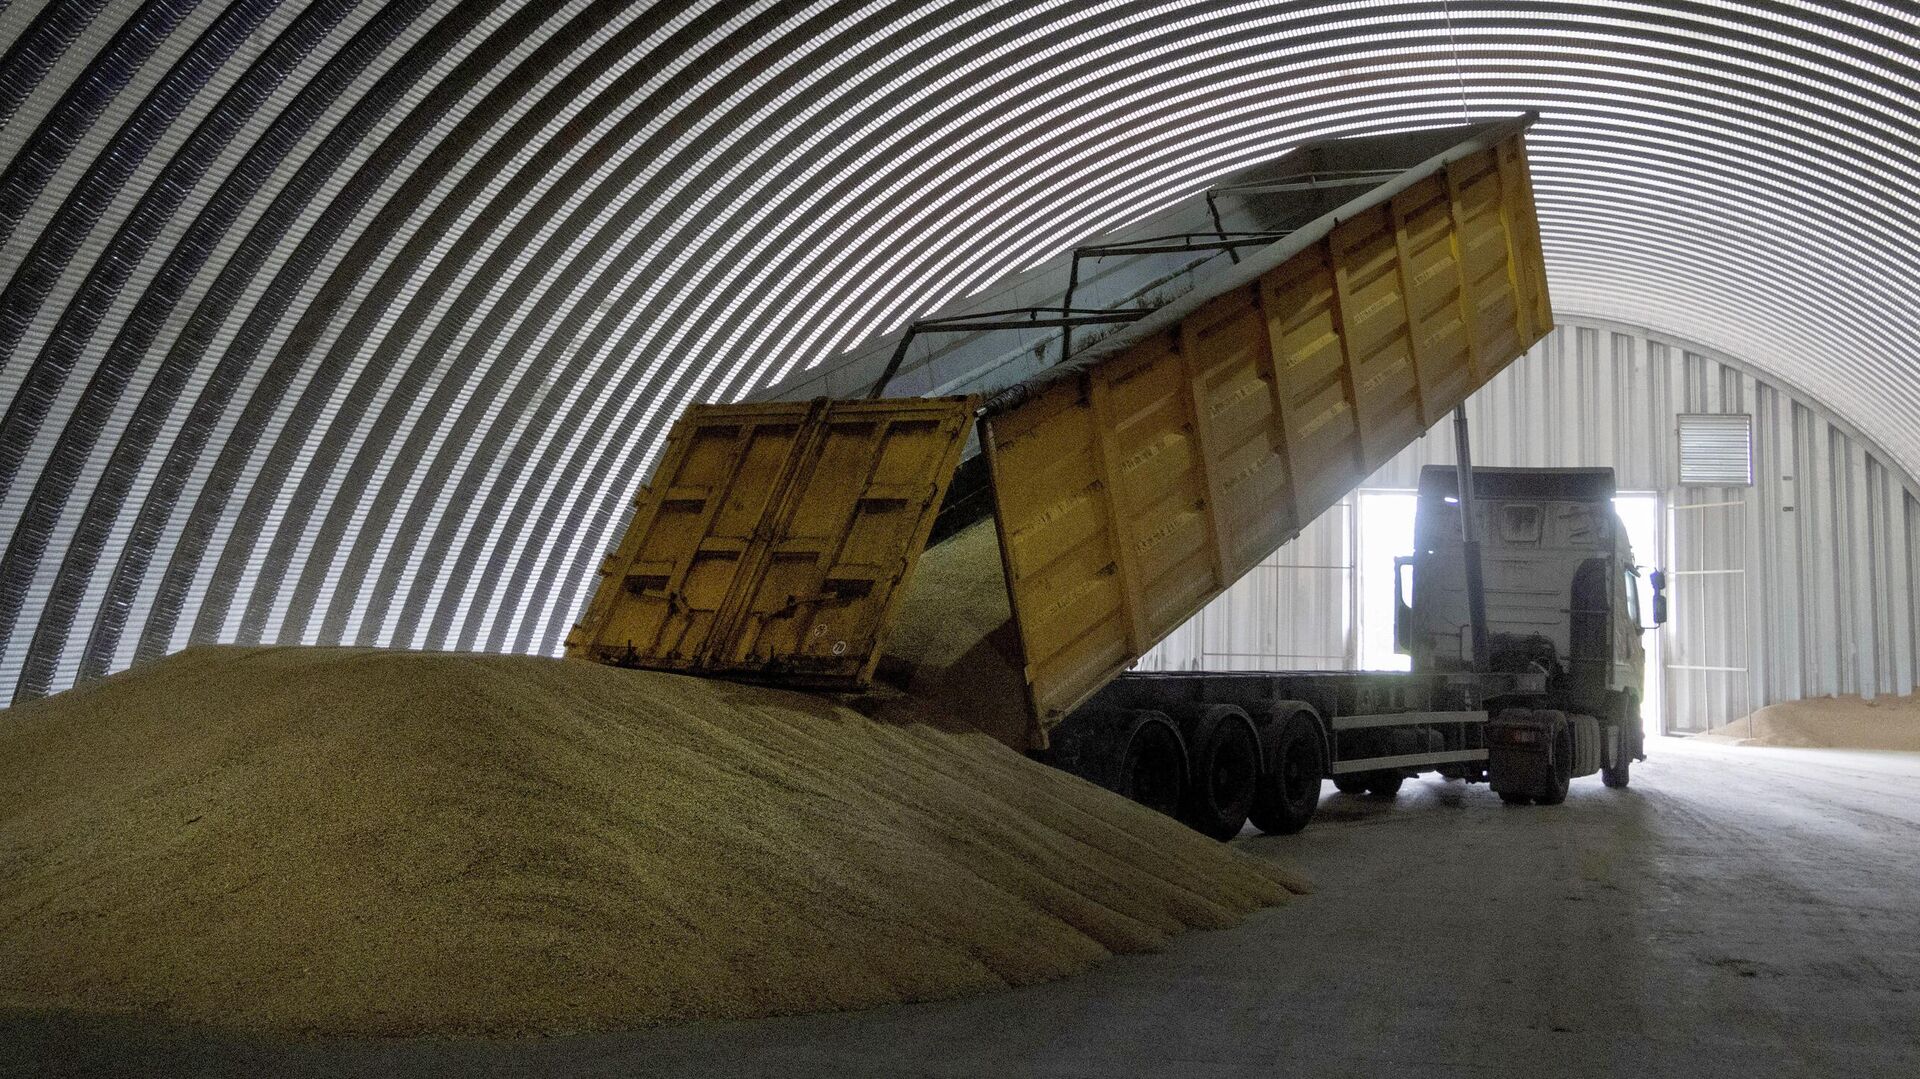 EU countries on the border with Ukraine demanded the extension of the grain import ban